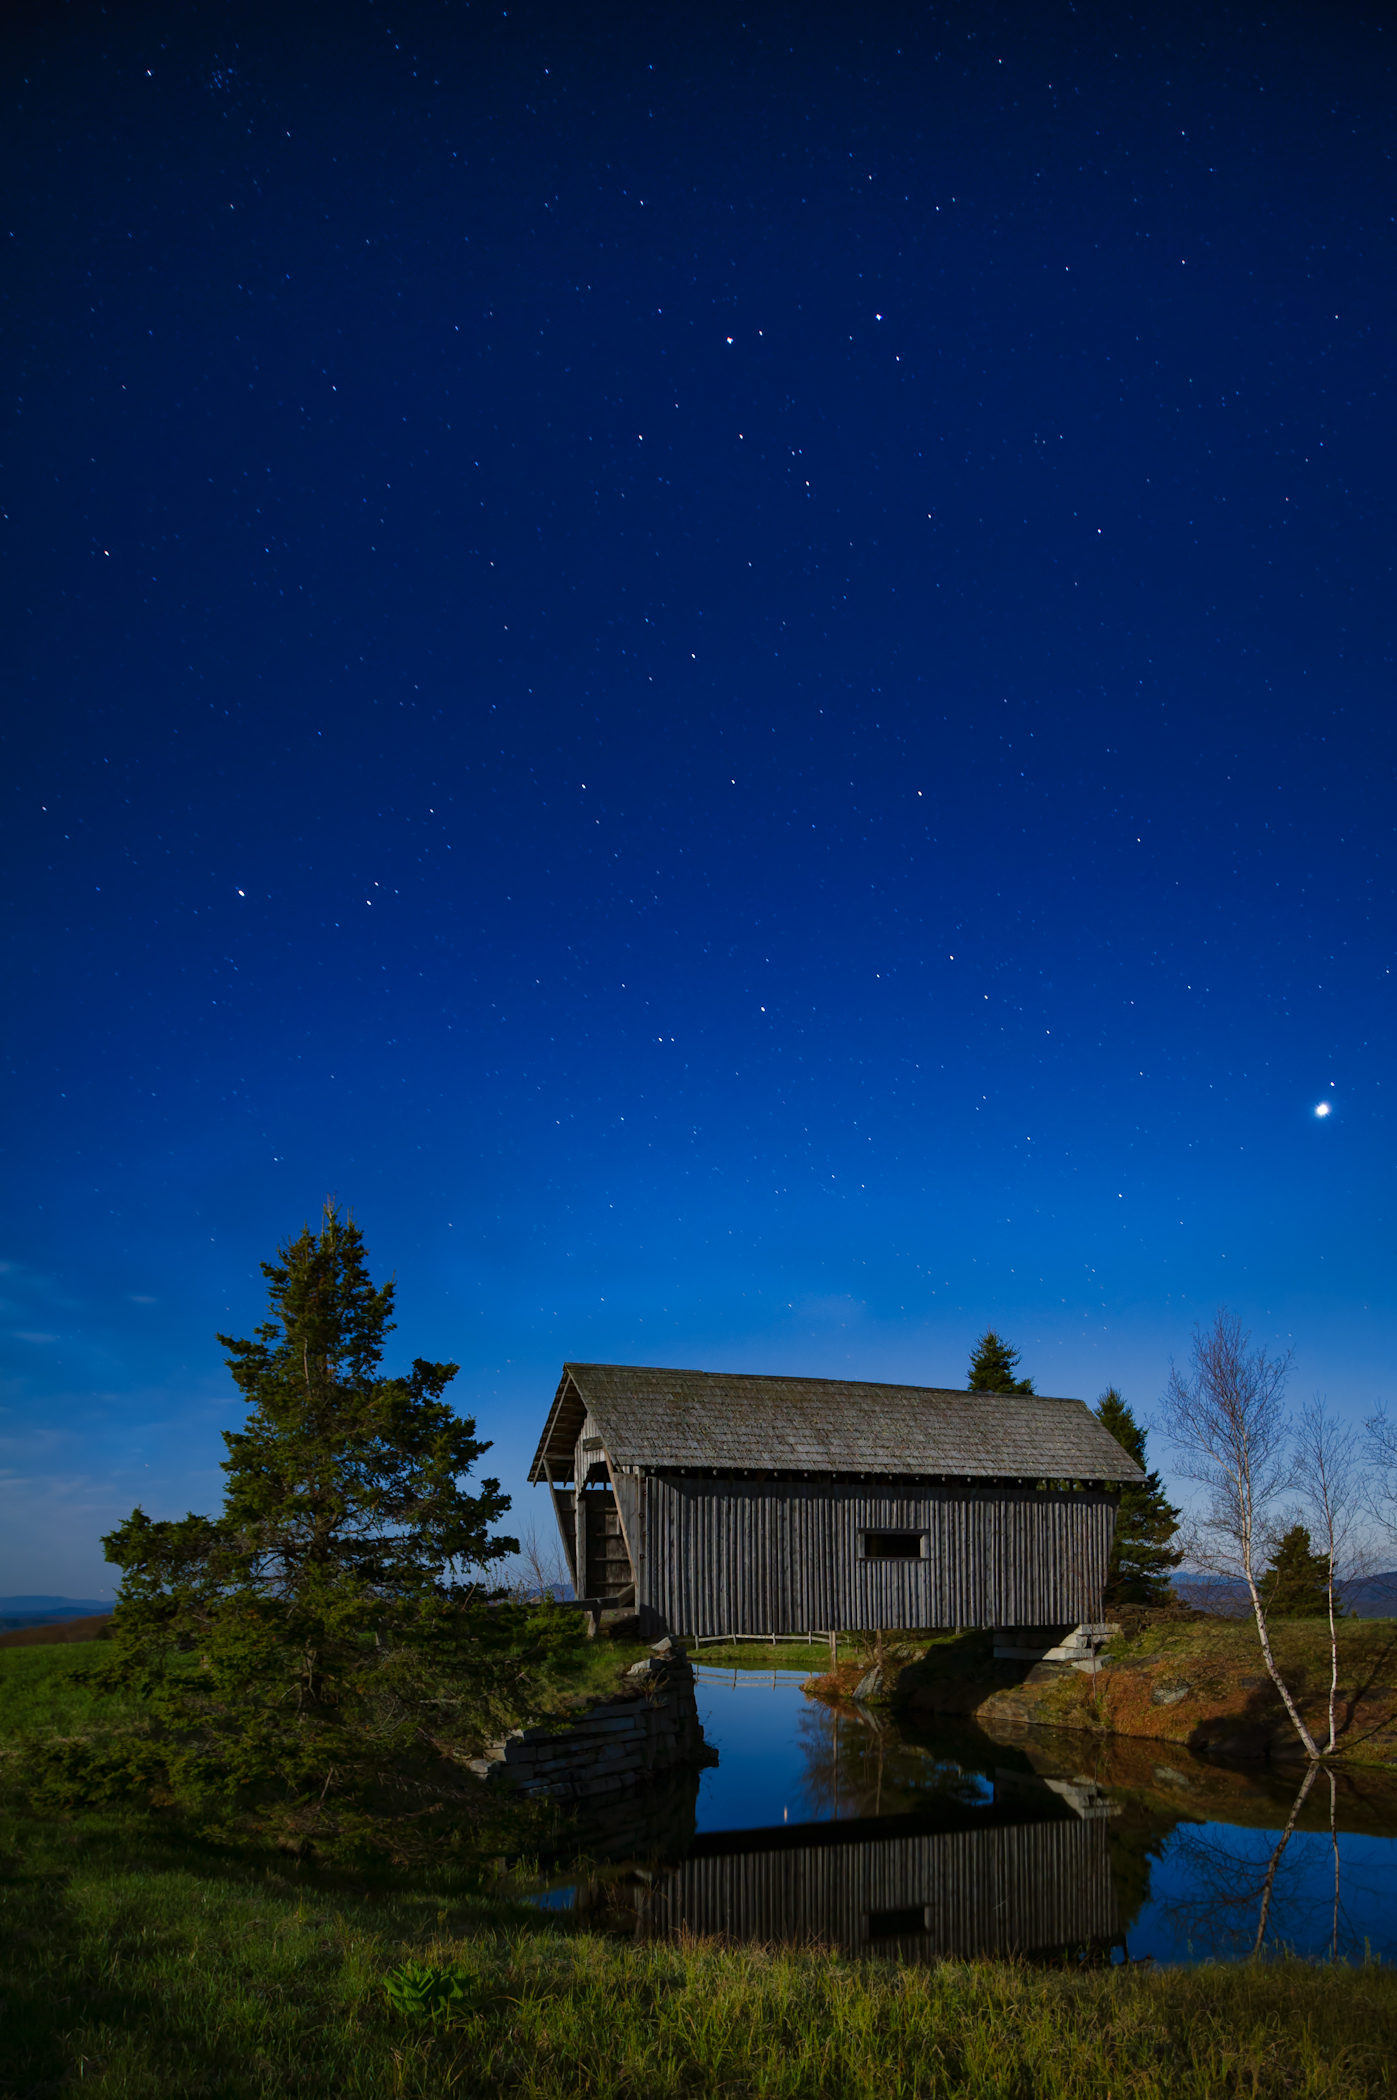 Venus Over Foster Bridge In Cabot, Vt (user submitted)